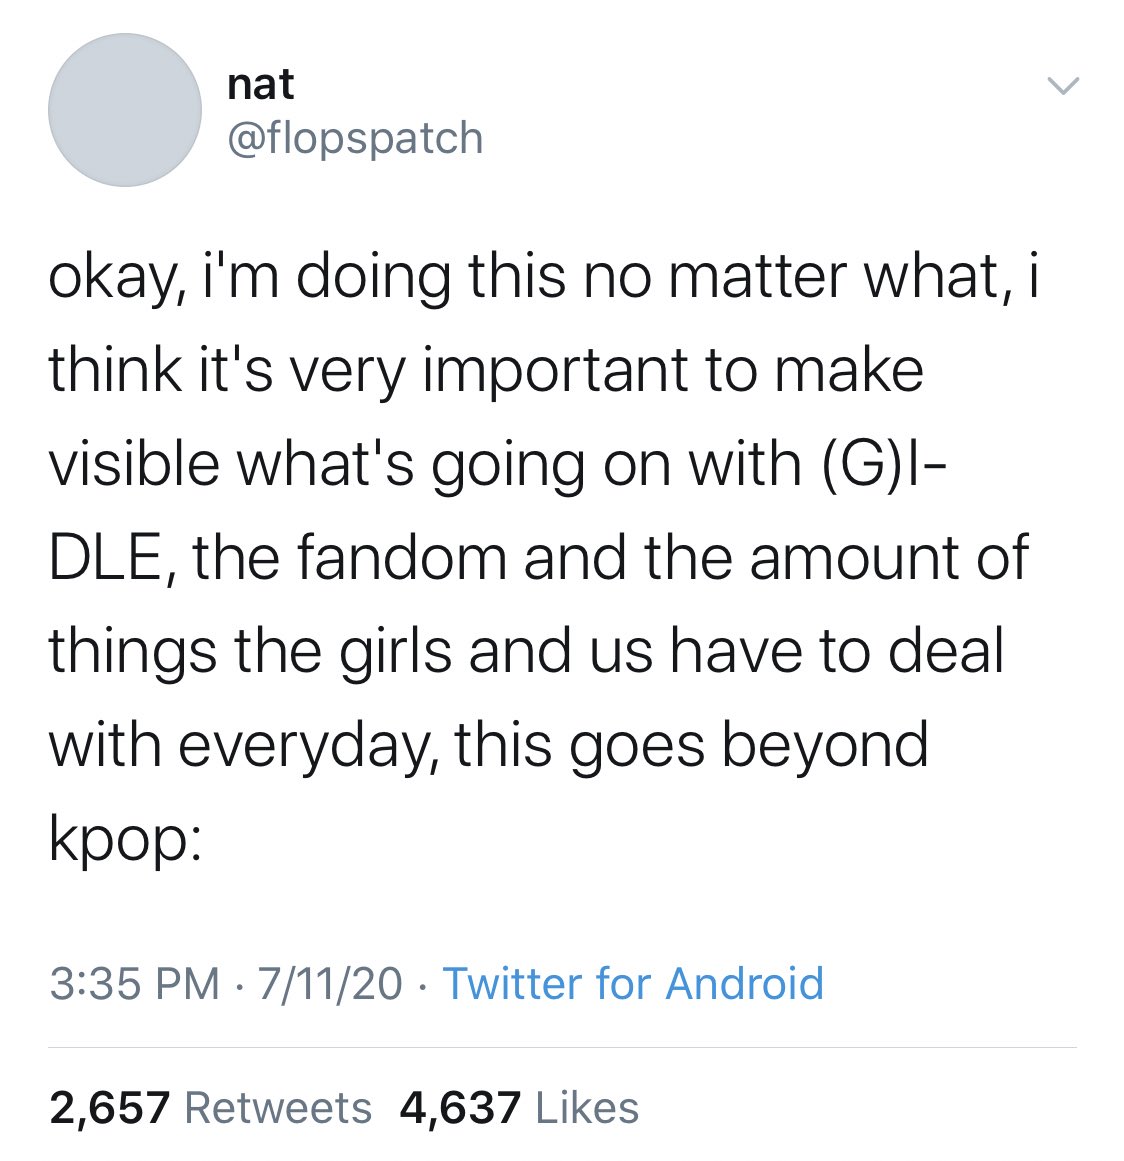 calling us dramatic for making the same exact thread expressing our concerns just like their fandom did. apparently we aren't allowed to also be sad over such things or raise concerns